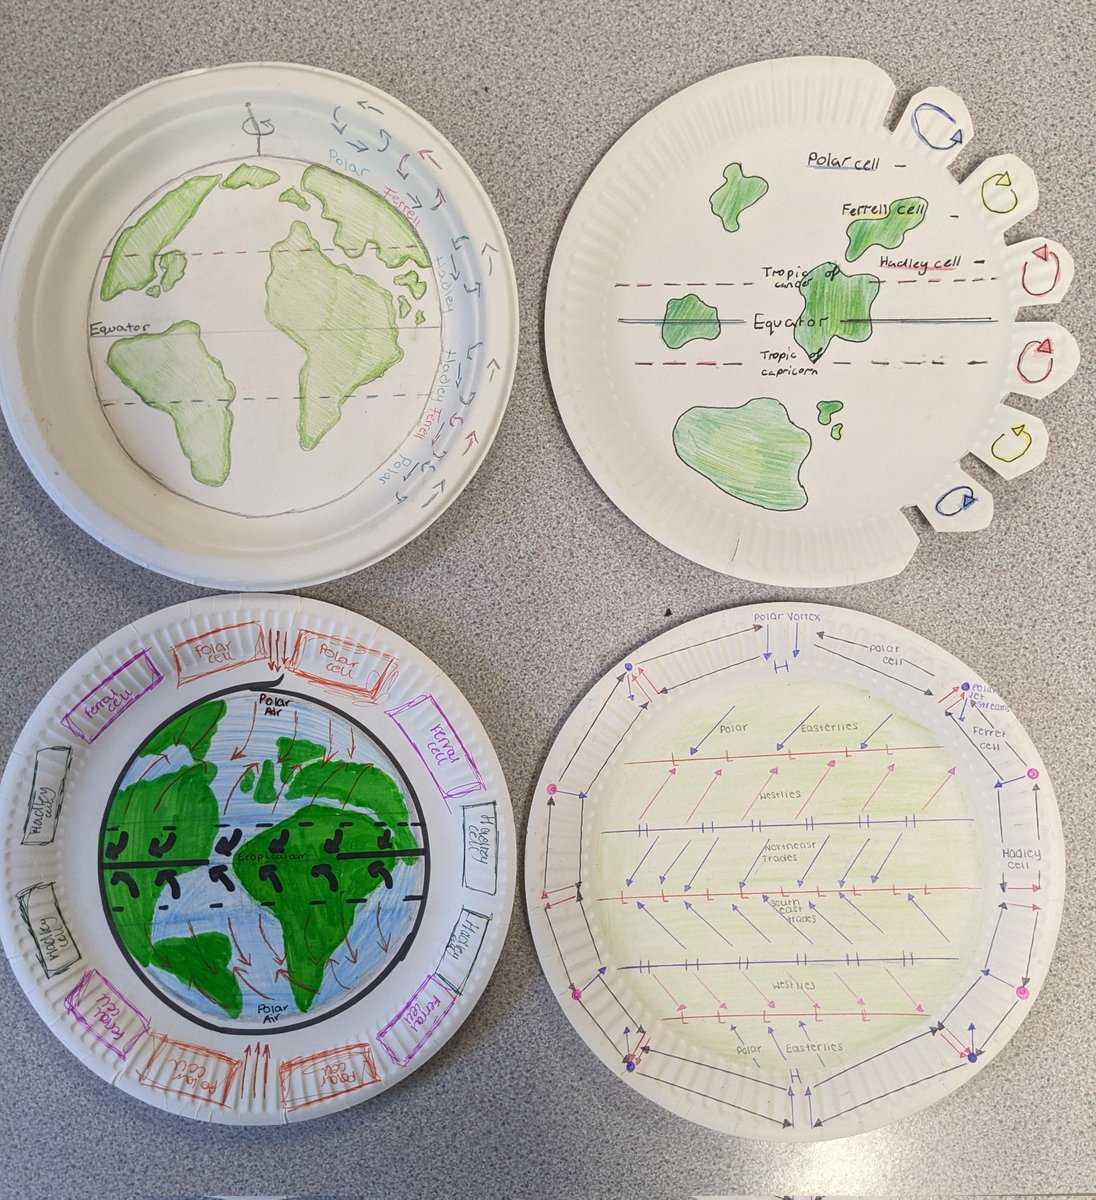 Paper plate tricellular models from Prenton Y9 students #Geography #geographyteacher